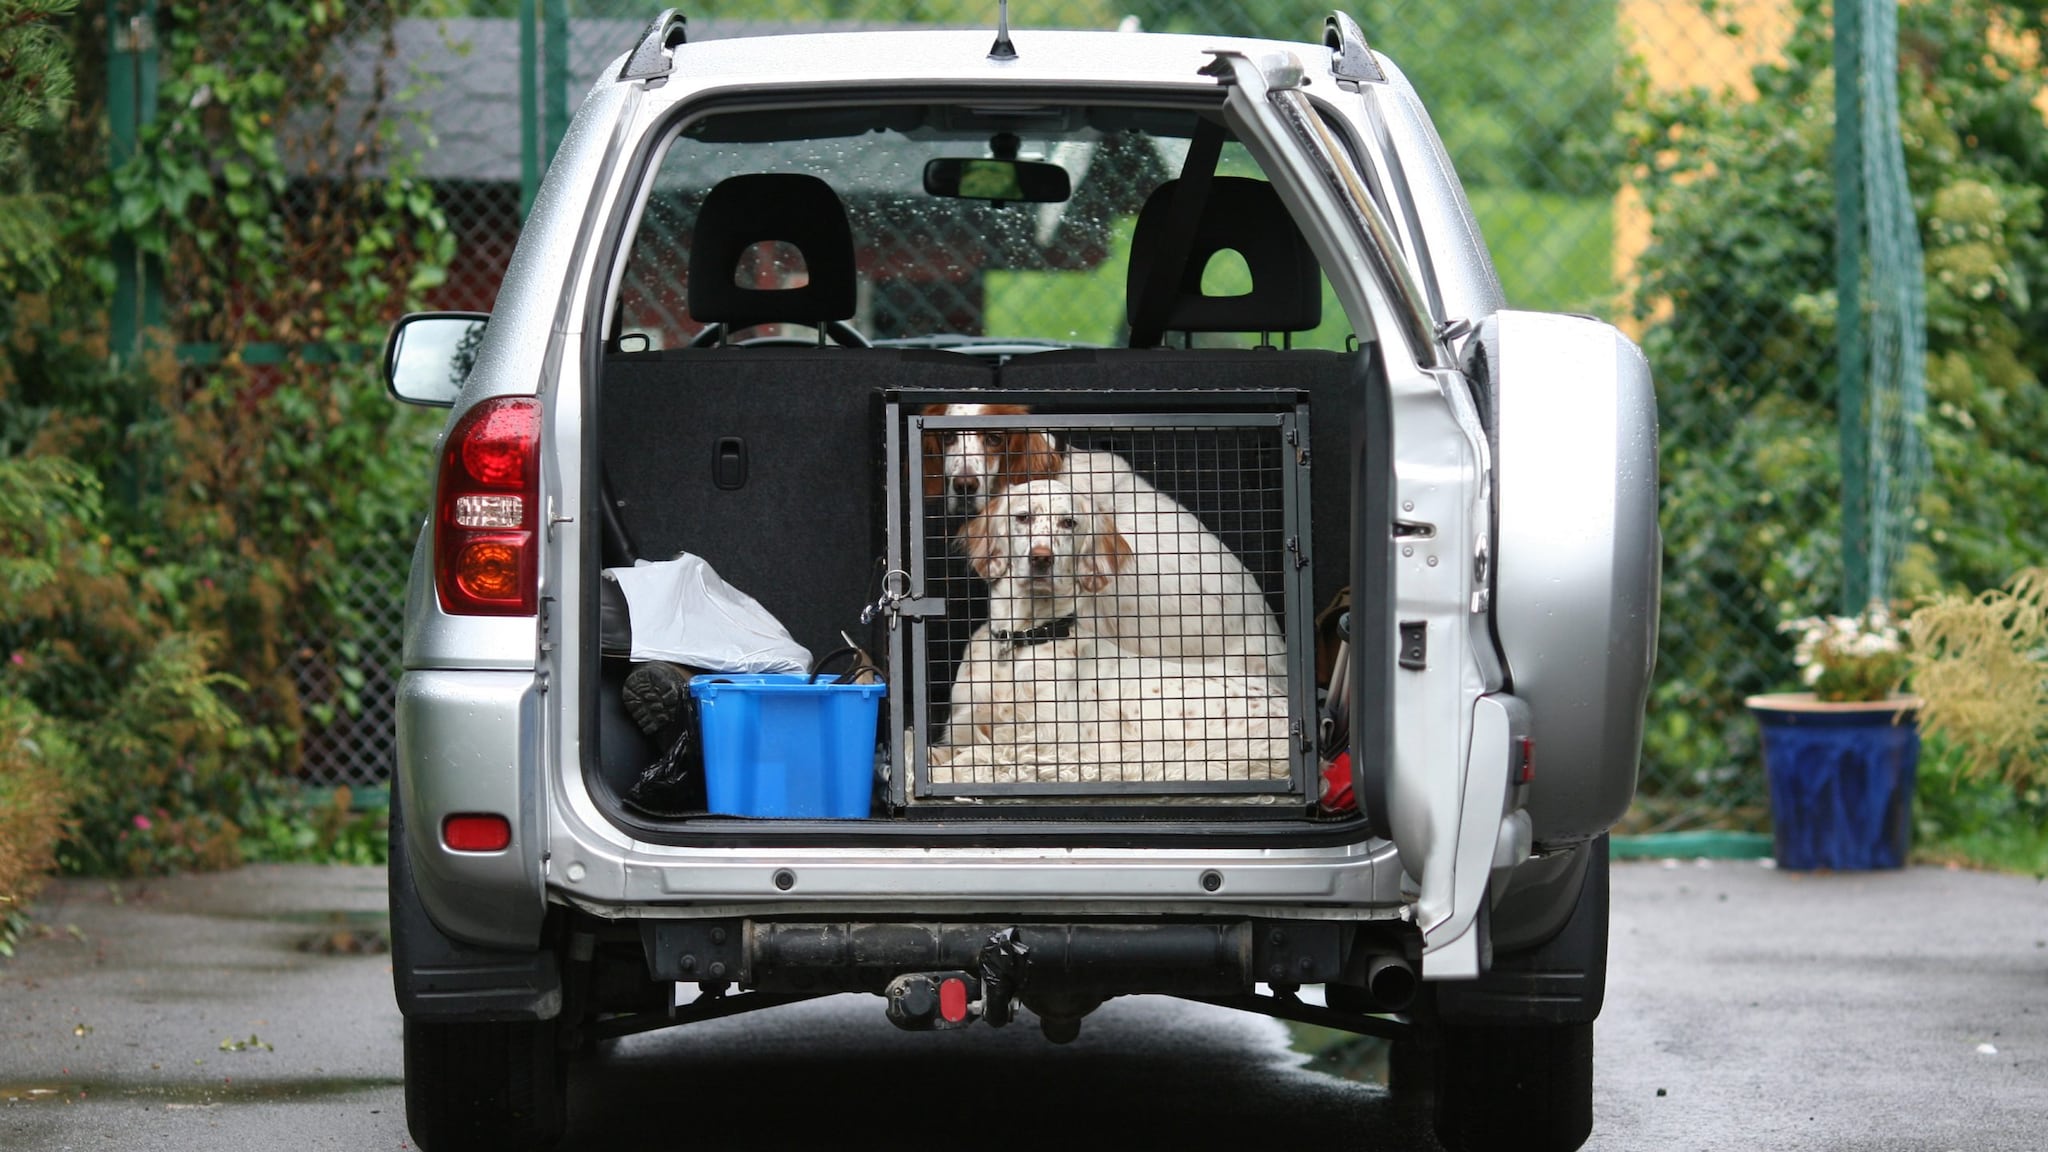 Dogs in a crate in the back of a packed SUV